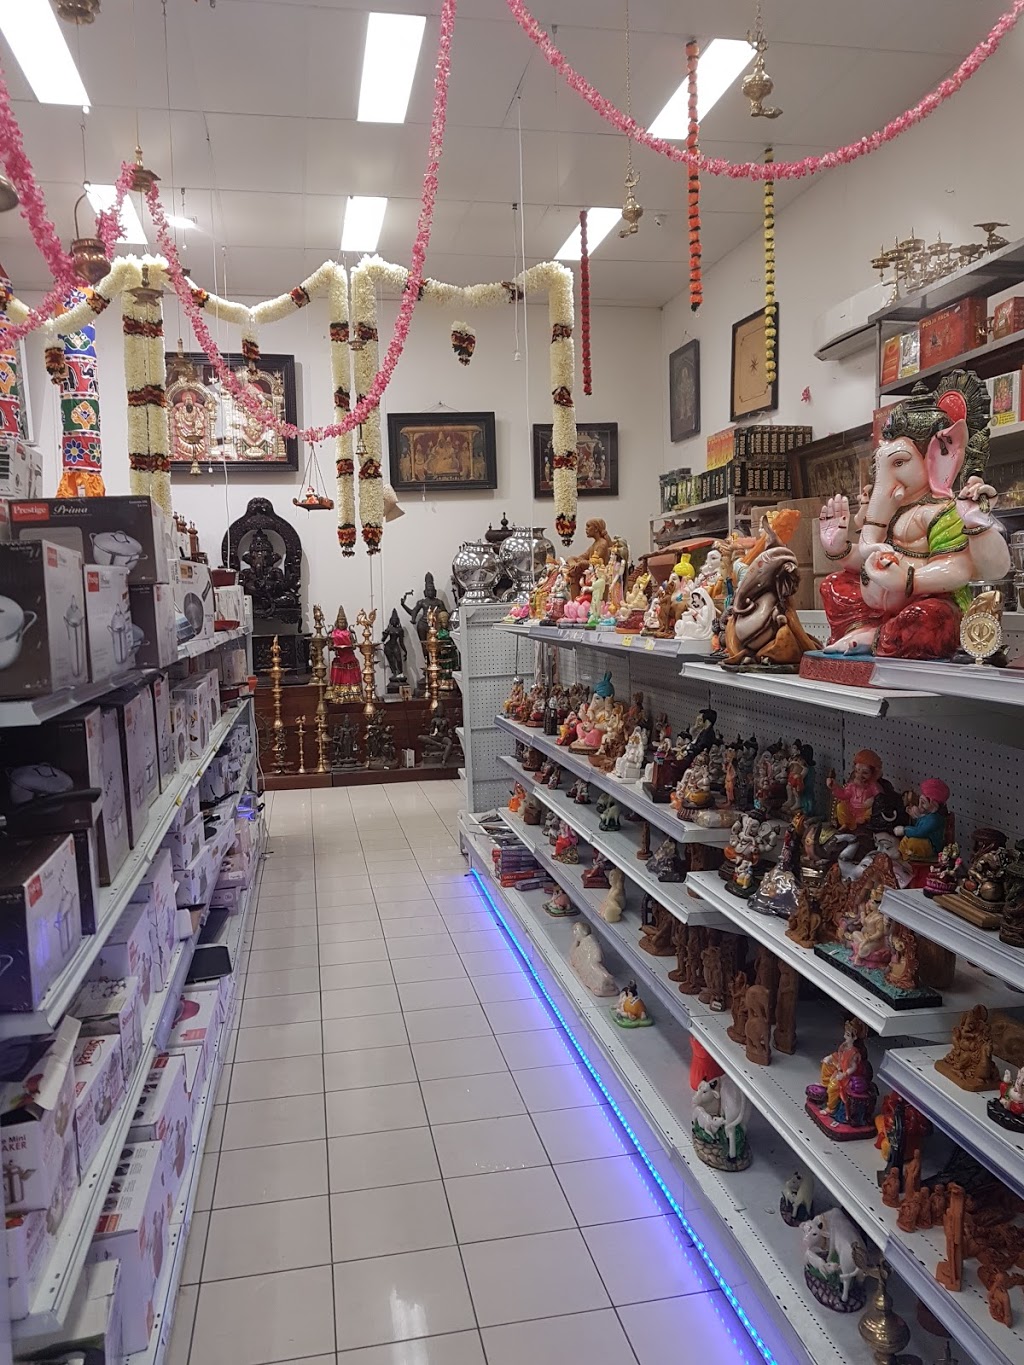 Vel Spices | store | 20 Boundary Rd, Carrum Downs VIC 3201, Australia | 0397828611 OR +61 3 9782 8611